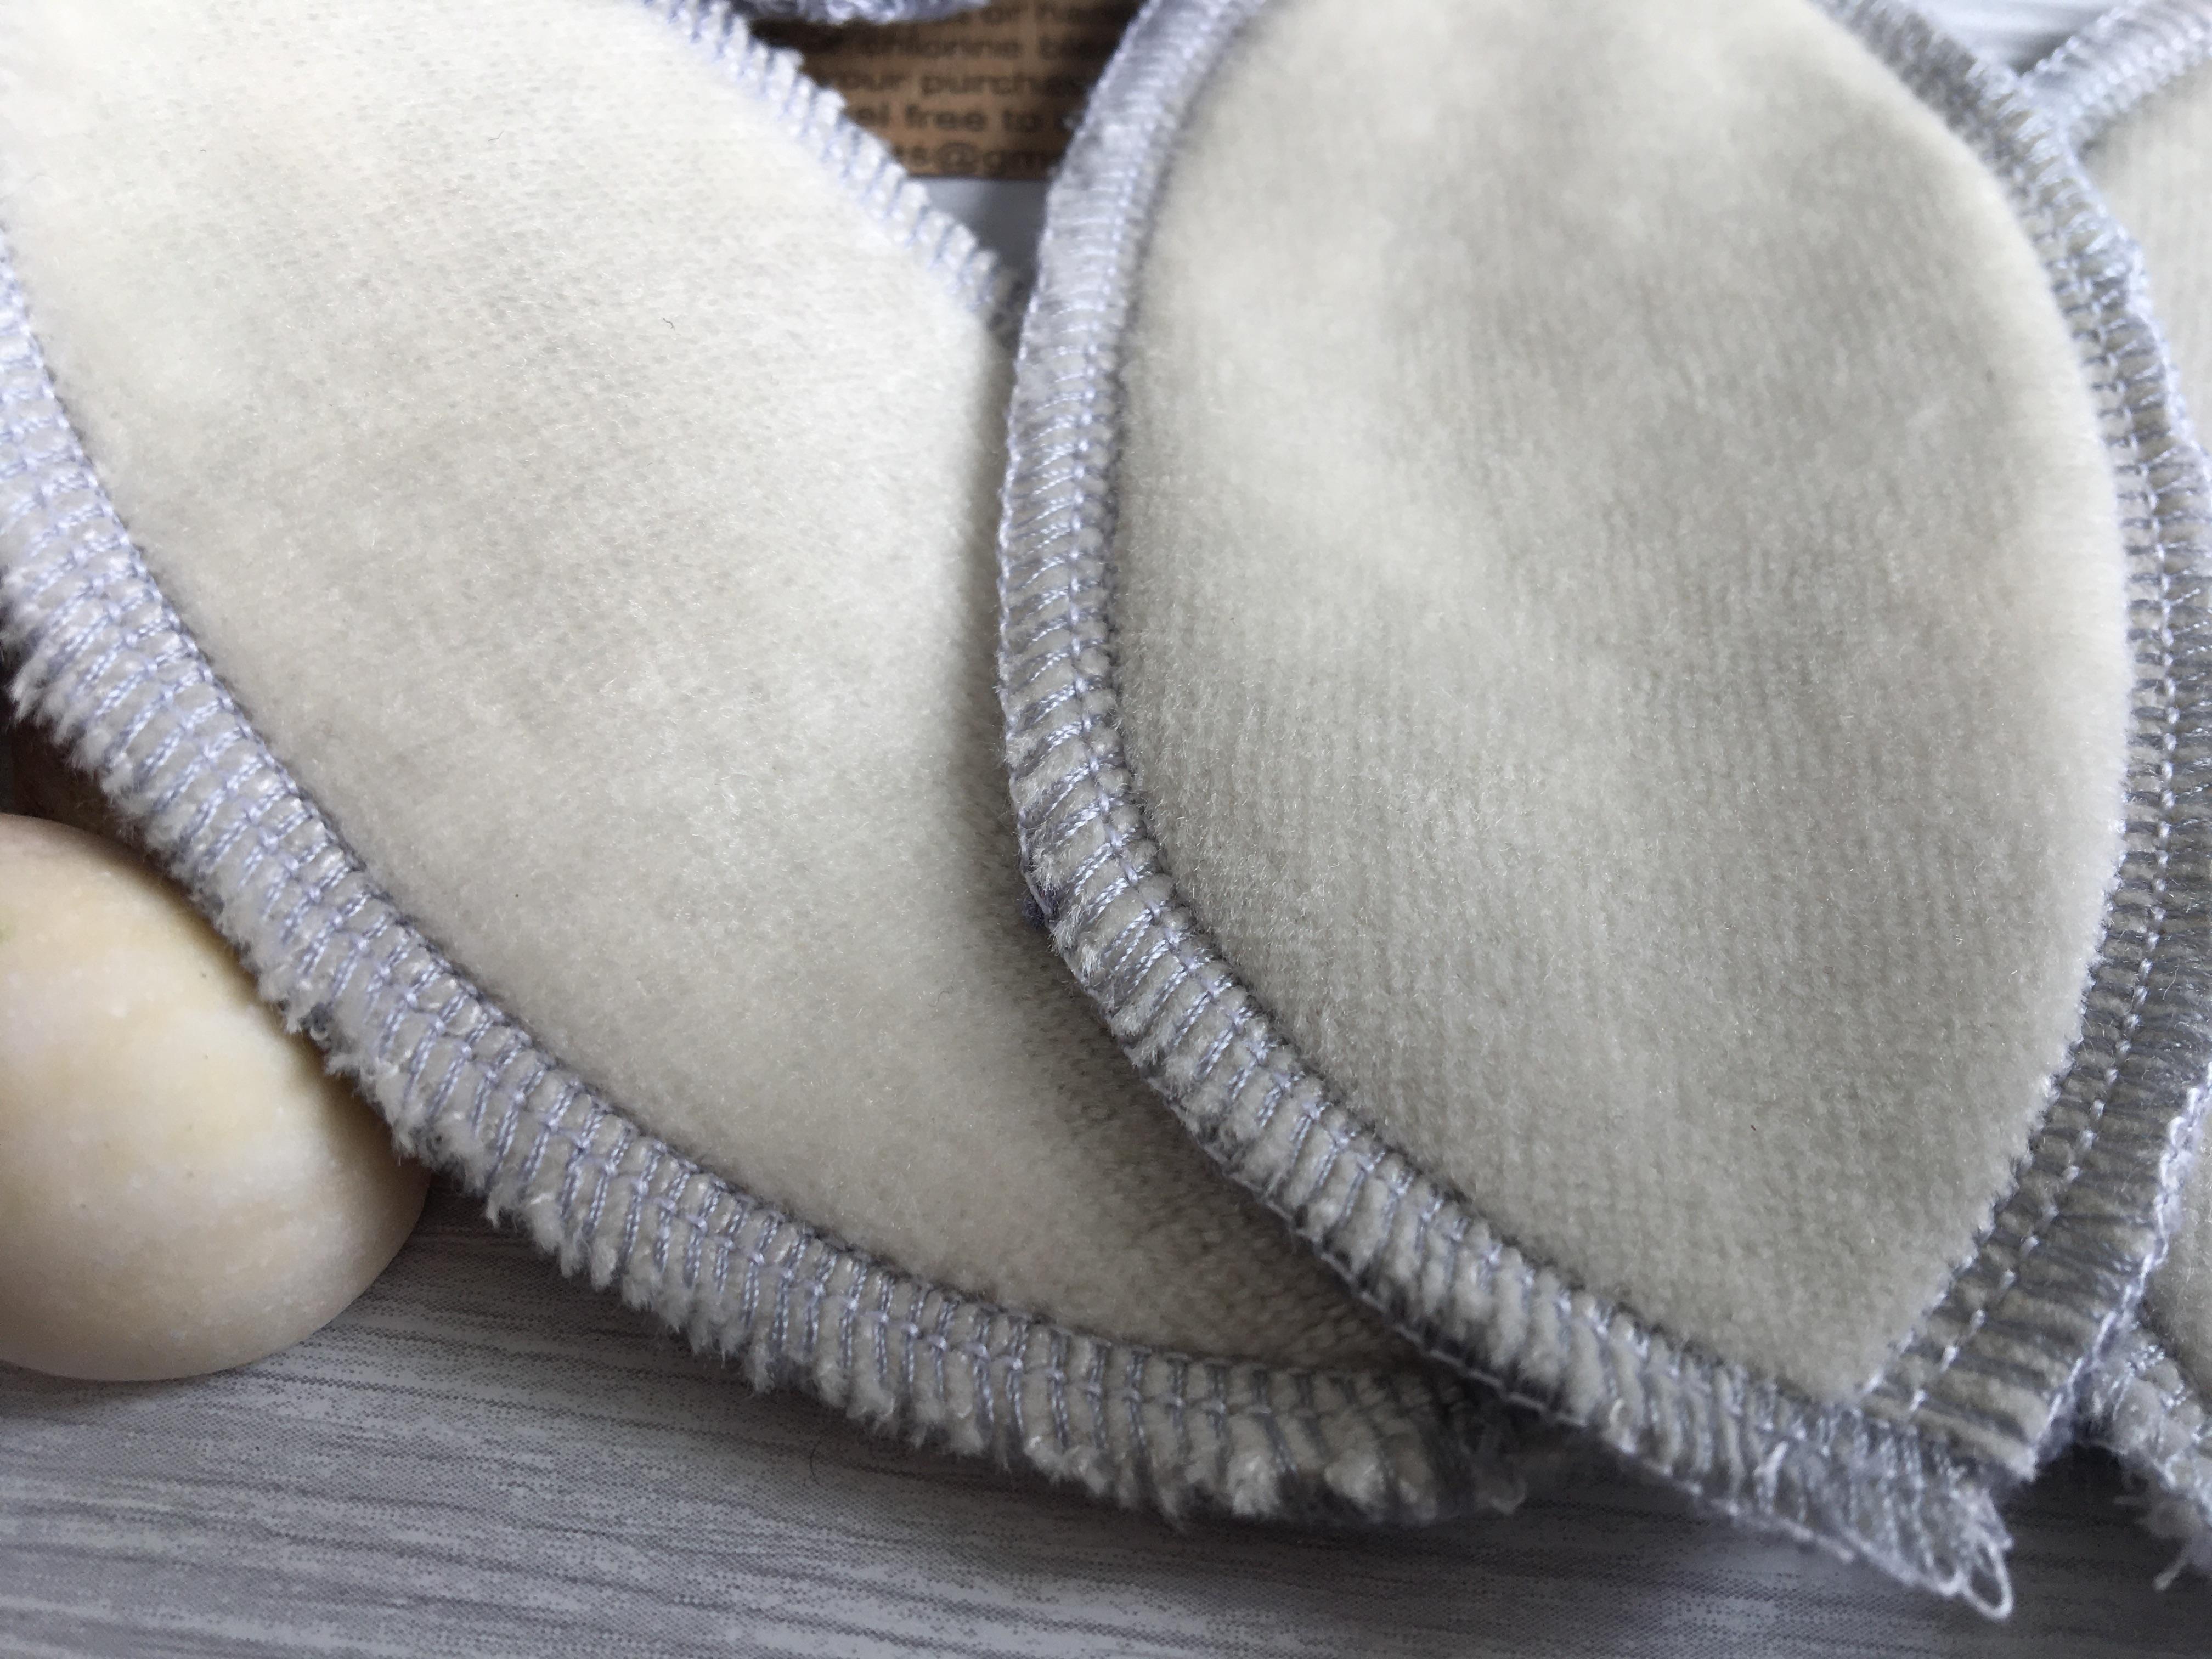 Detail of the organic bamboo face of the interlabial pads with fleece backing